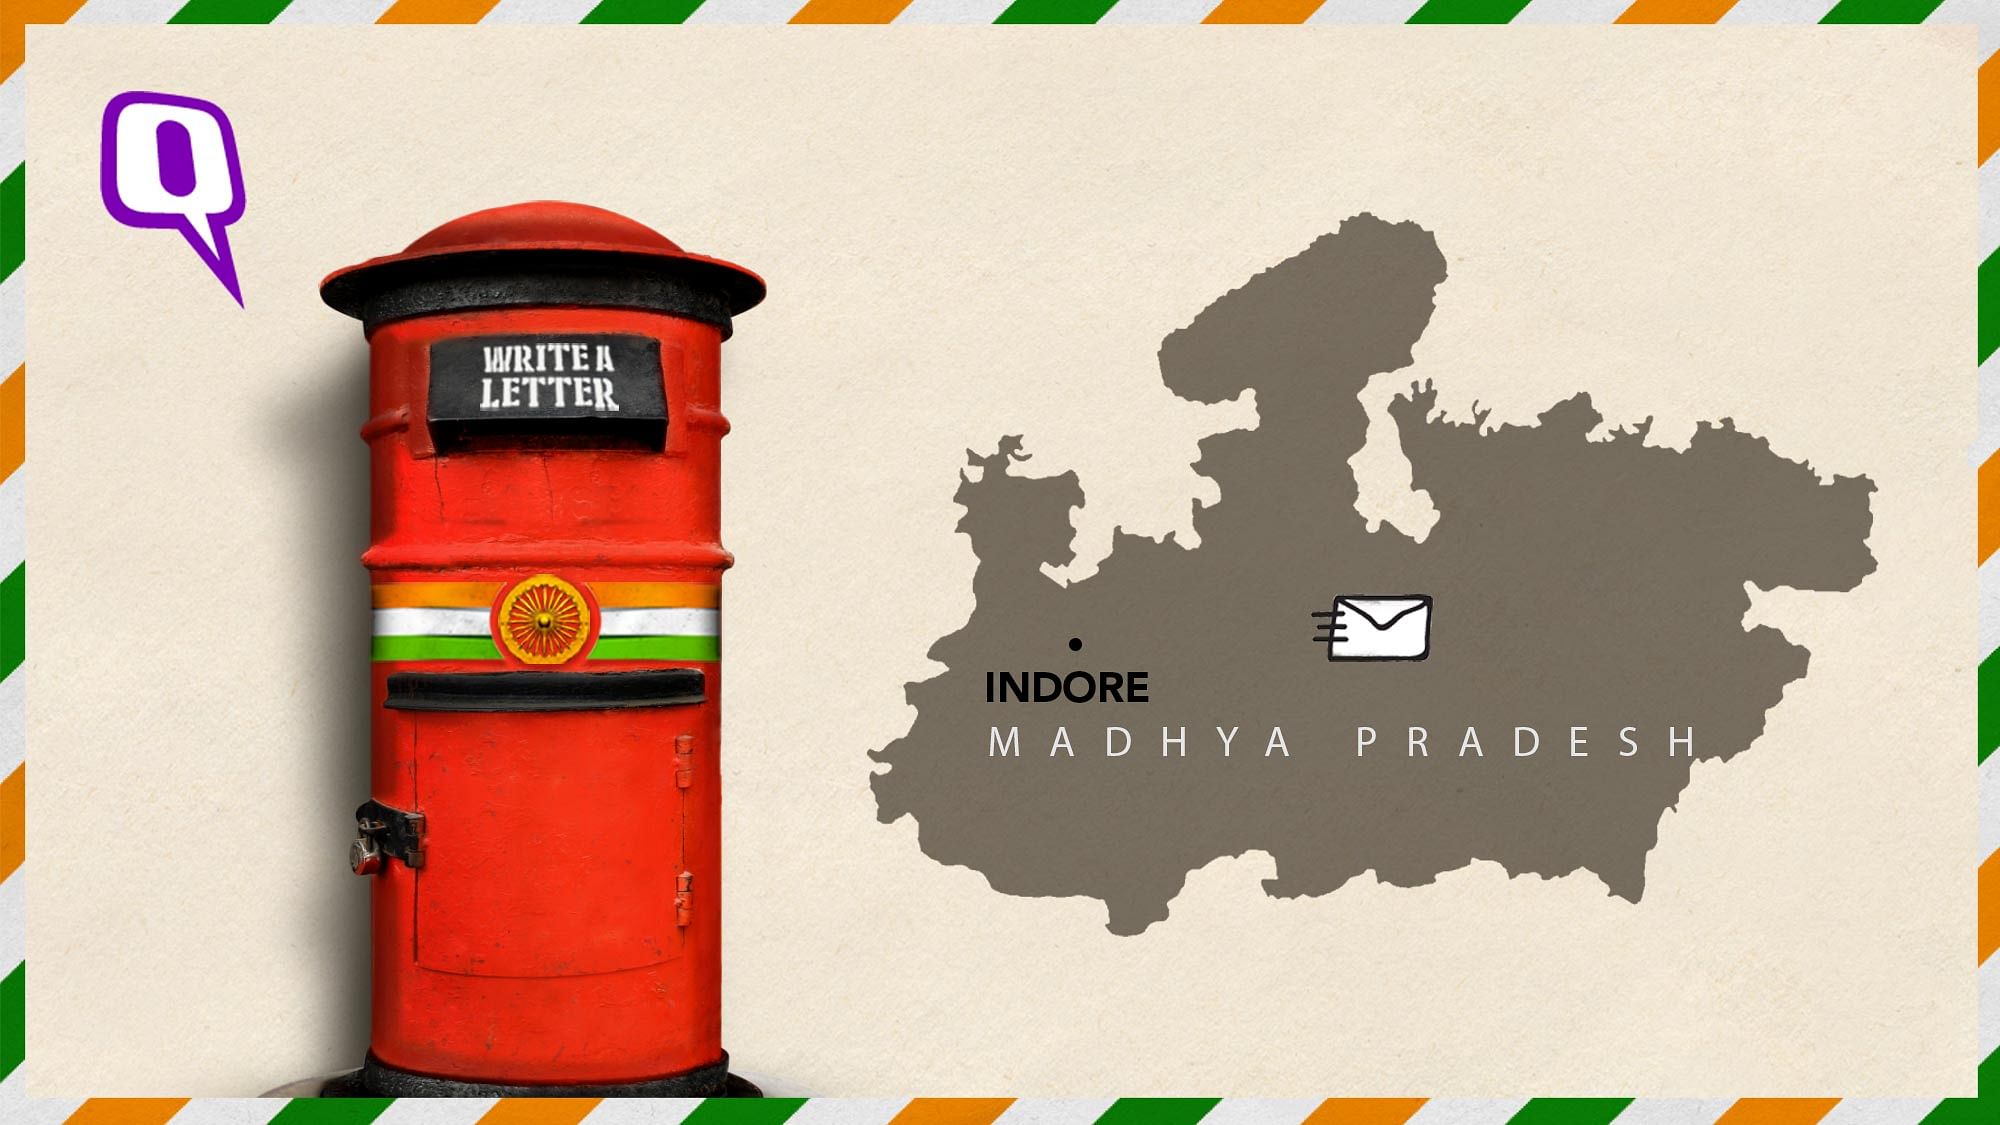 This Republic Day, send a letter to India.